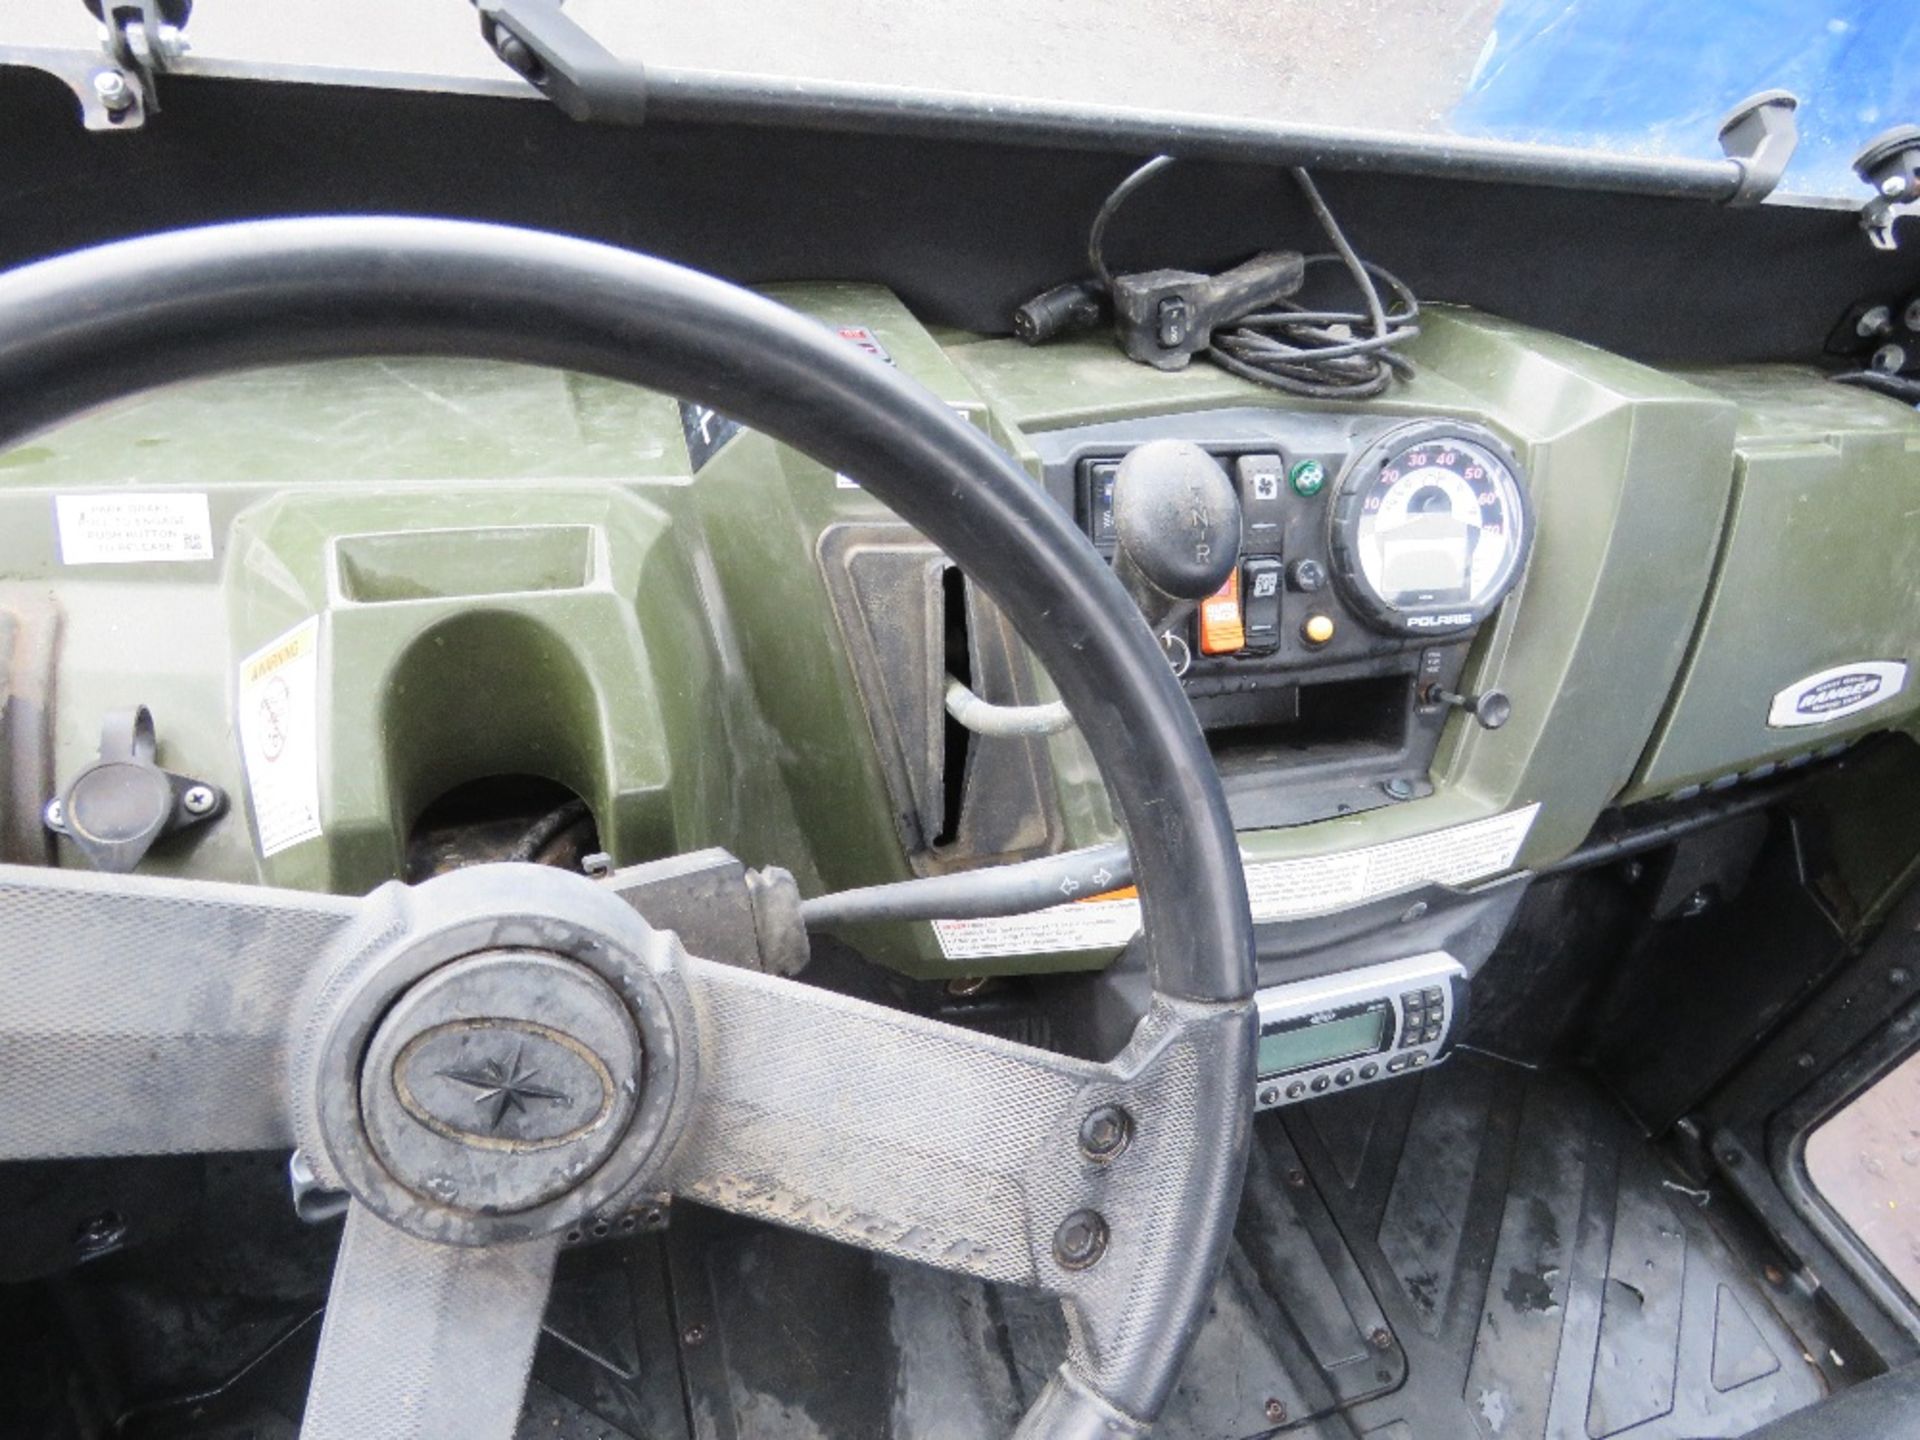 POLARIS 900D CABBED RANGER DIESEL ENGINED ROUGH TERRAIN OFF ROAD BUGGY UTILITY VEHICLE 1363 REC HOUR - Image 3 of 9